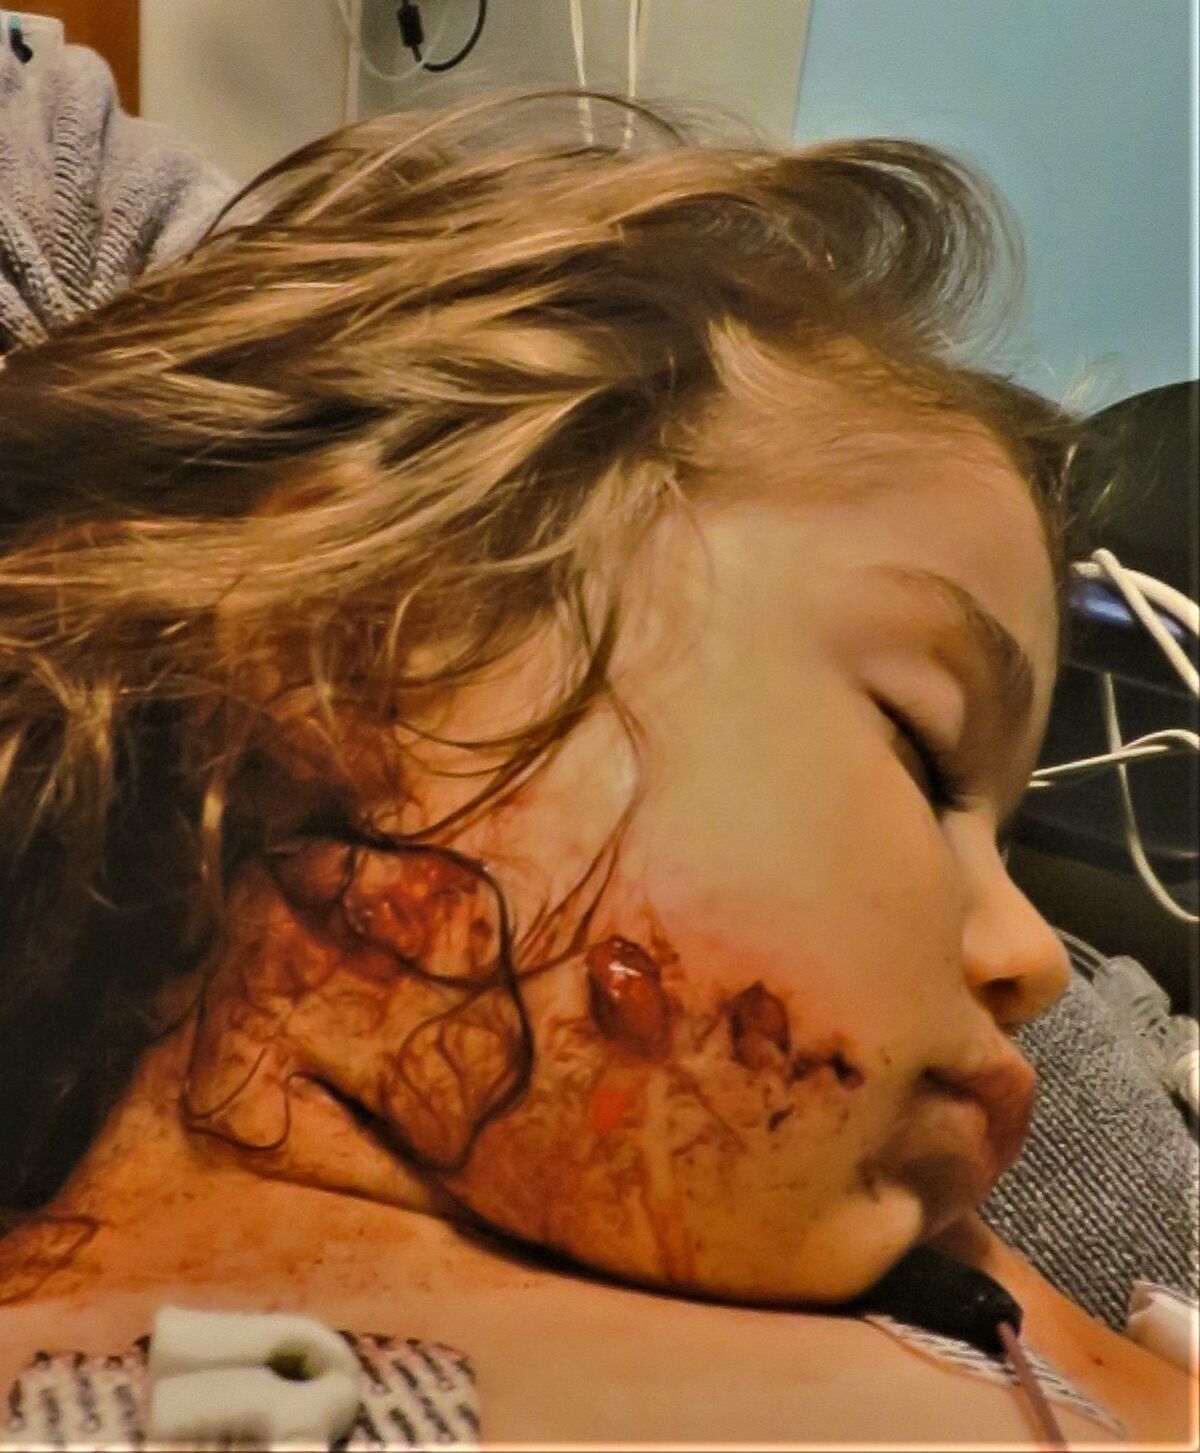 A photo showing the extent of damage sustained by a 2-year-old girl attacked April 28 by a coyote in Huntington Beach.